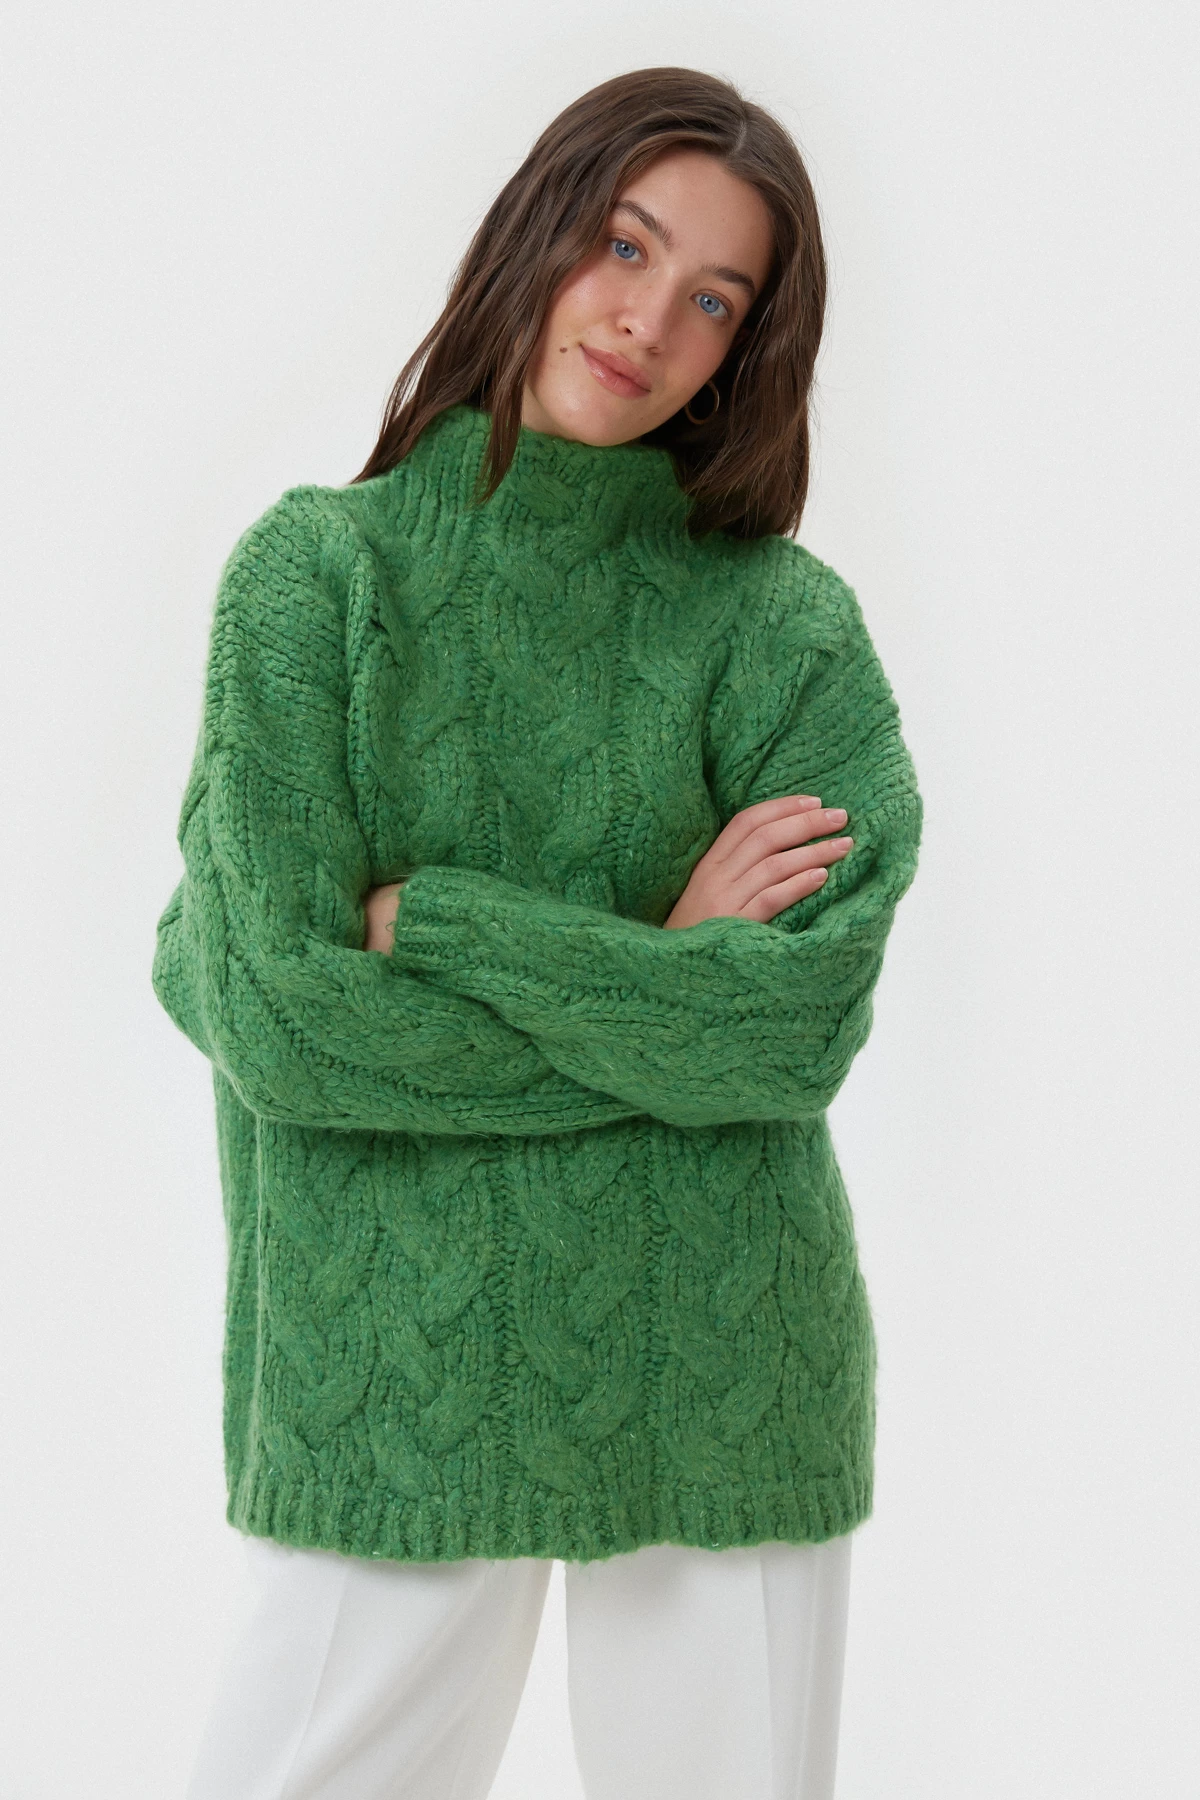 Green elongated sweater in "braids" with cotton, photo 3